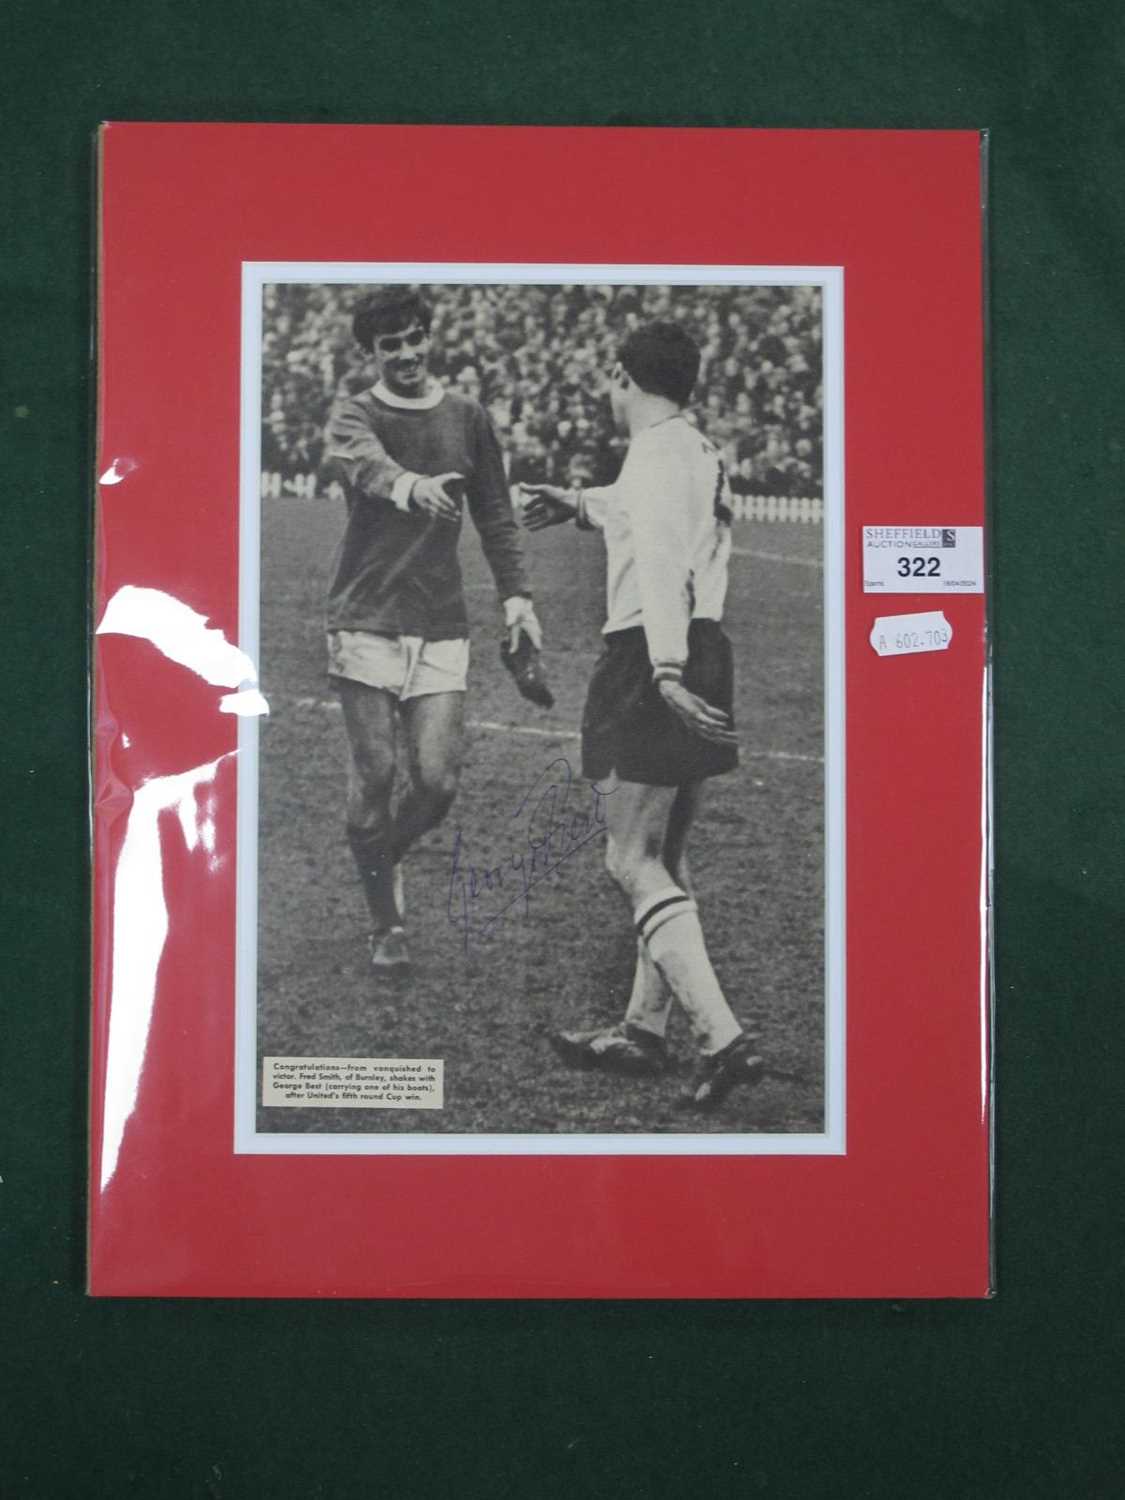 George Best Autograph, (unverified) blue ink signed on an image of him shaking hands with an